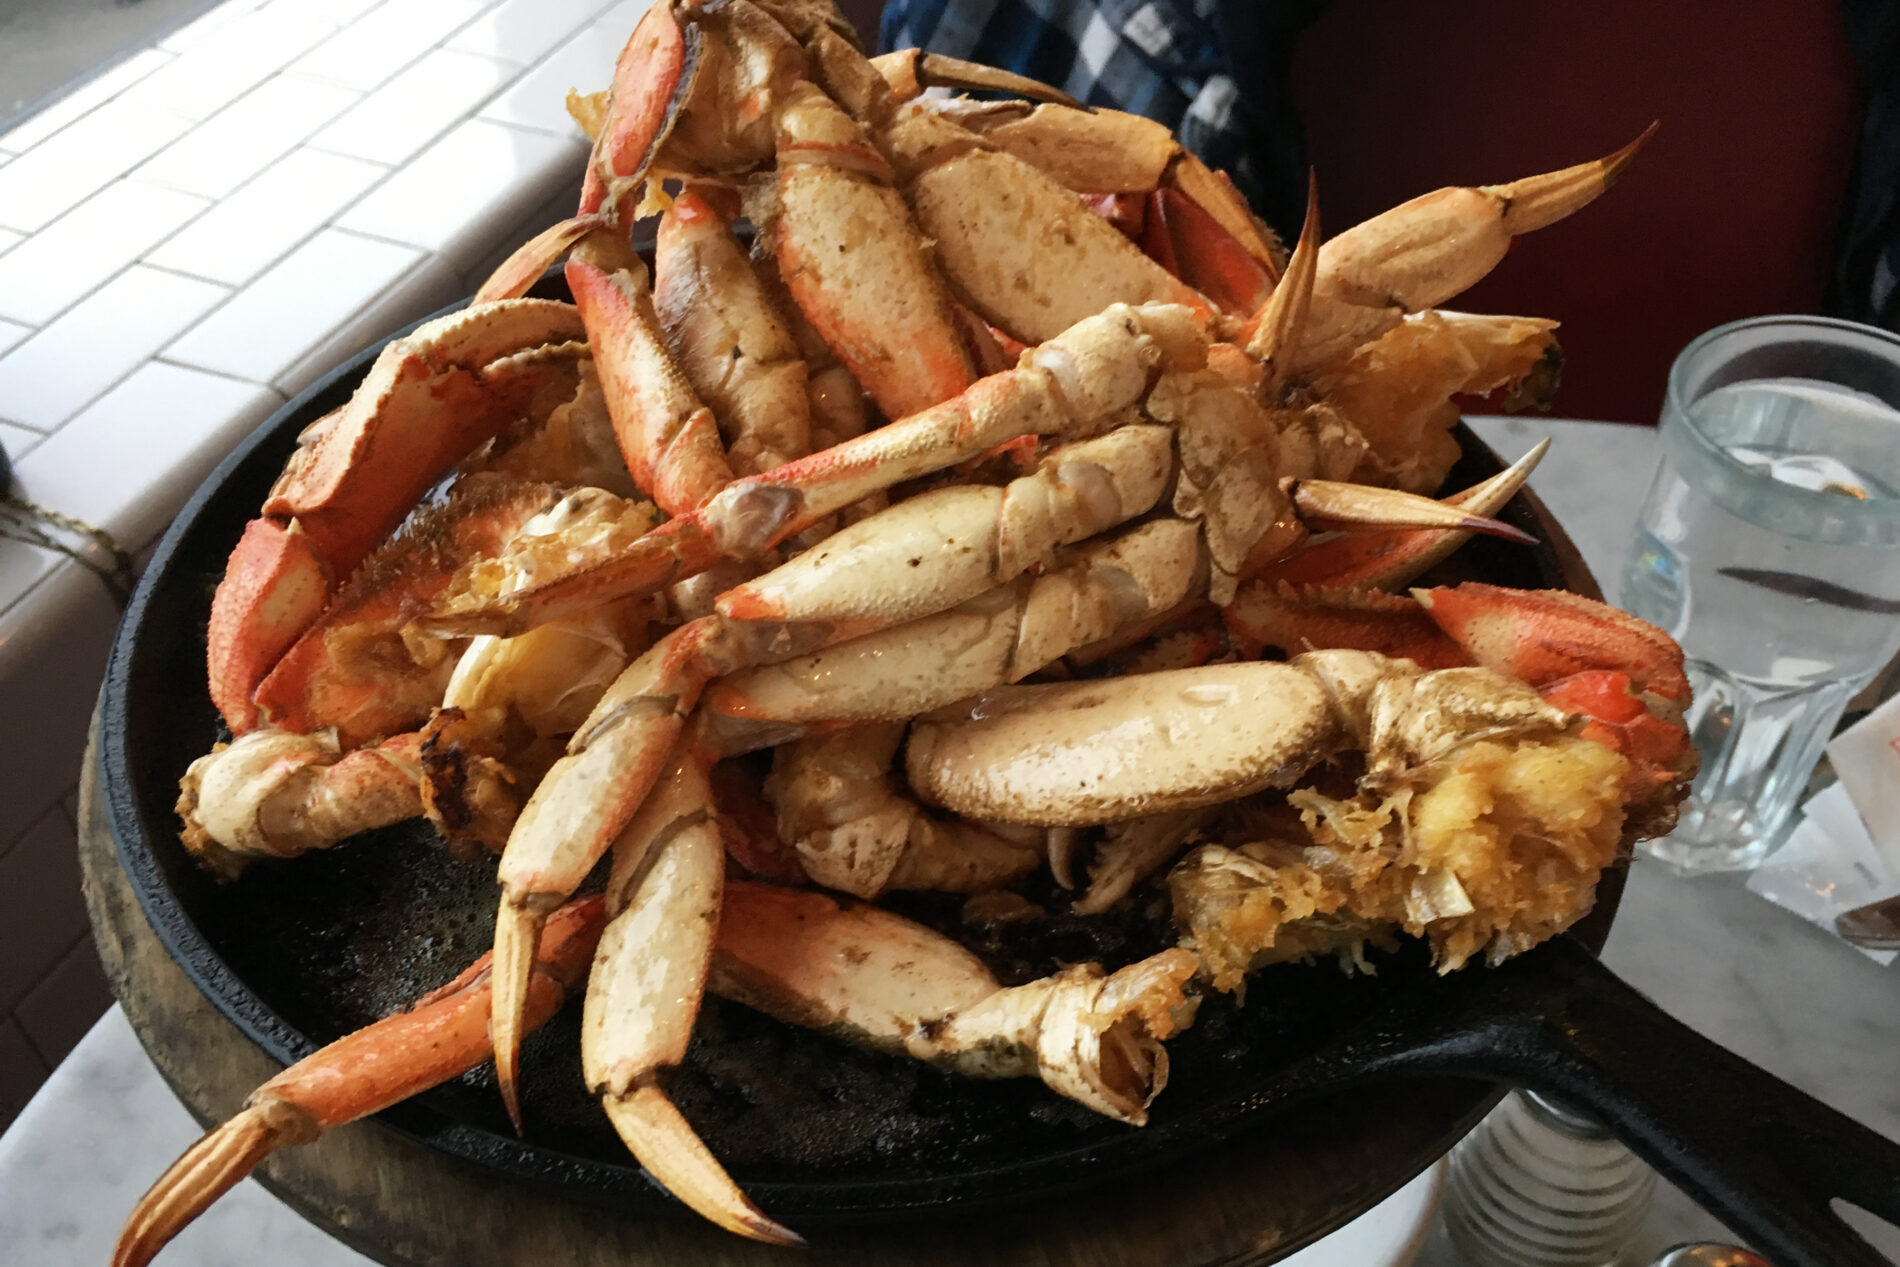 Skillet of roasted crab at the Franciscan Crab Restaurant, Fishermen’s Wharf in San Francisco.